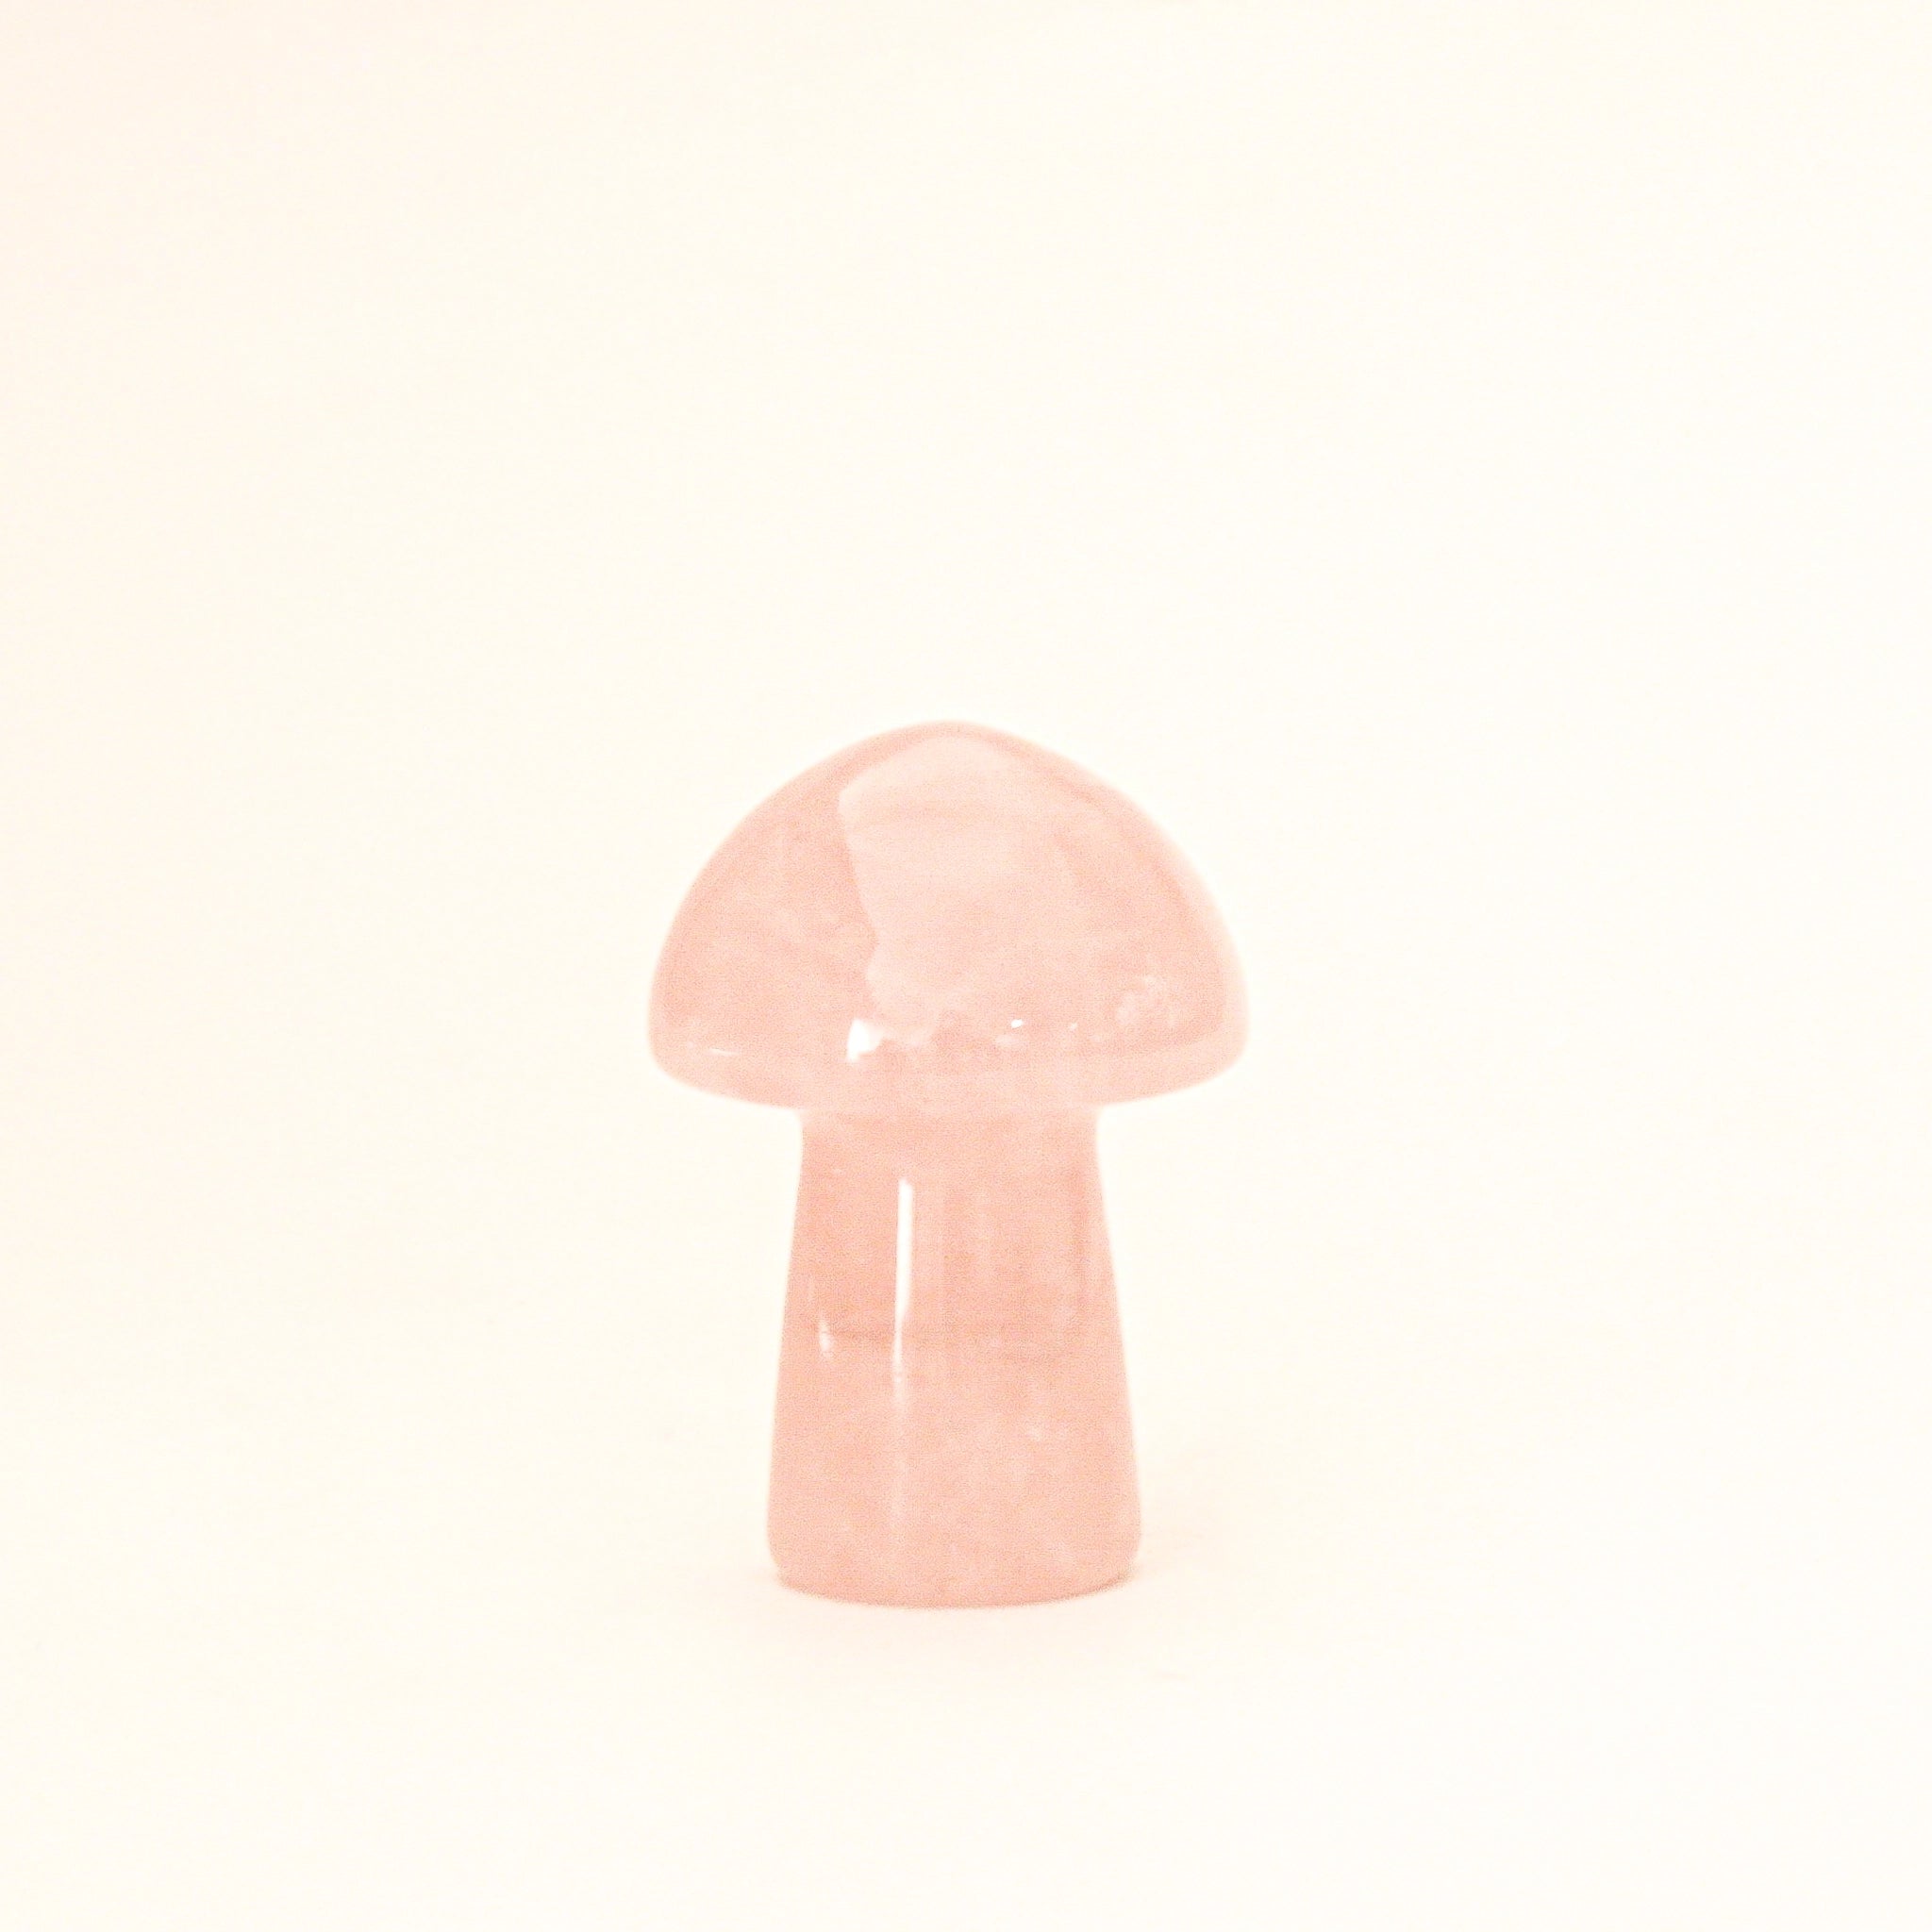 On a cream background is a model holding a tiny rose quartz crystal in the shape of a mushroom.